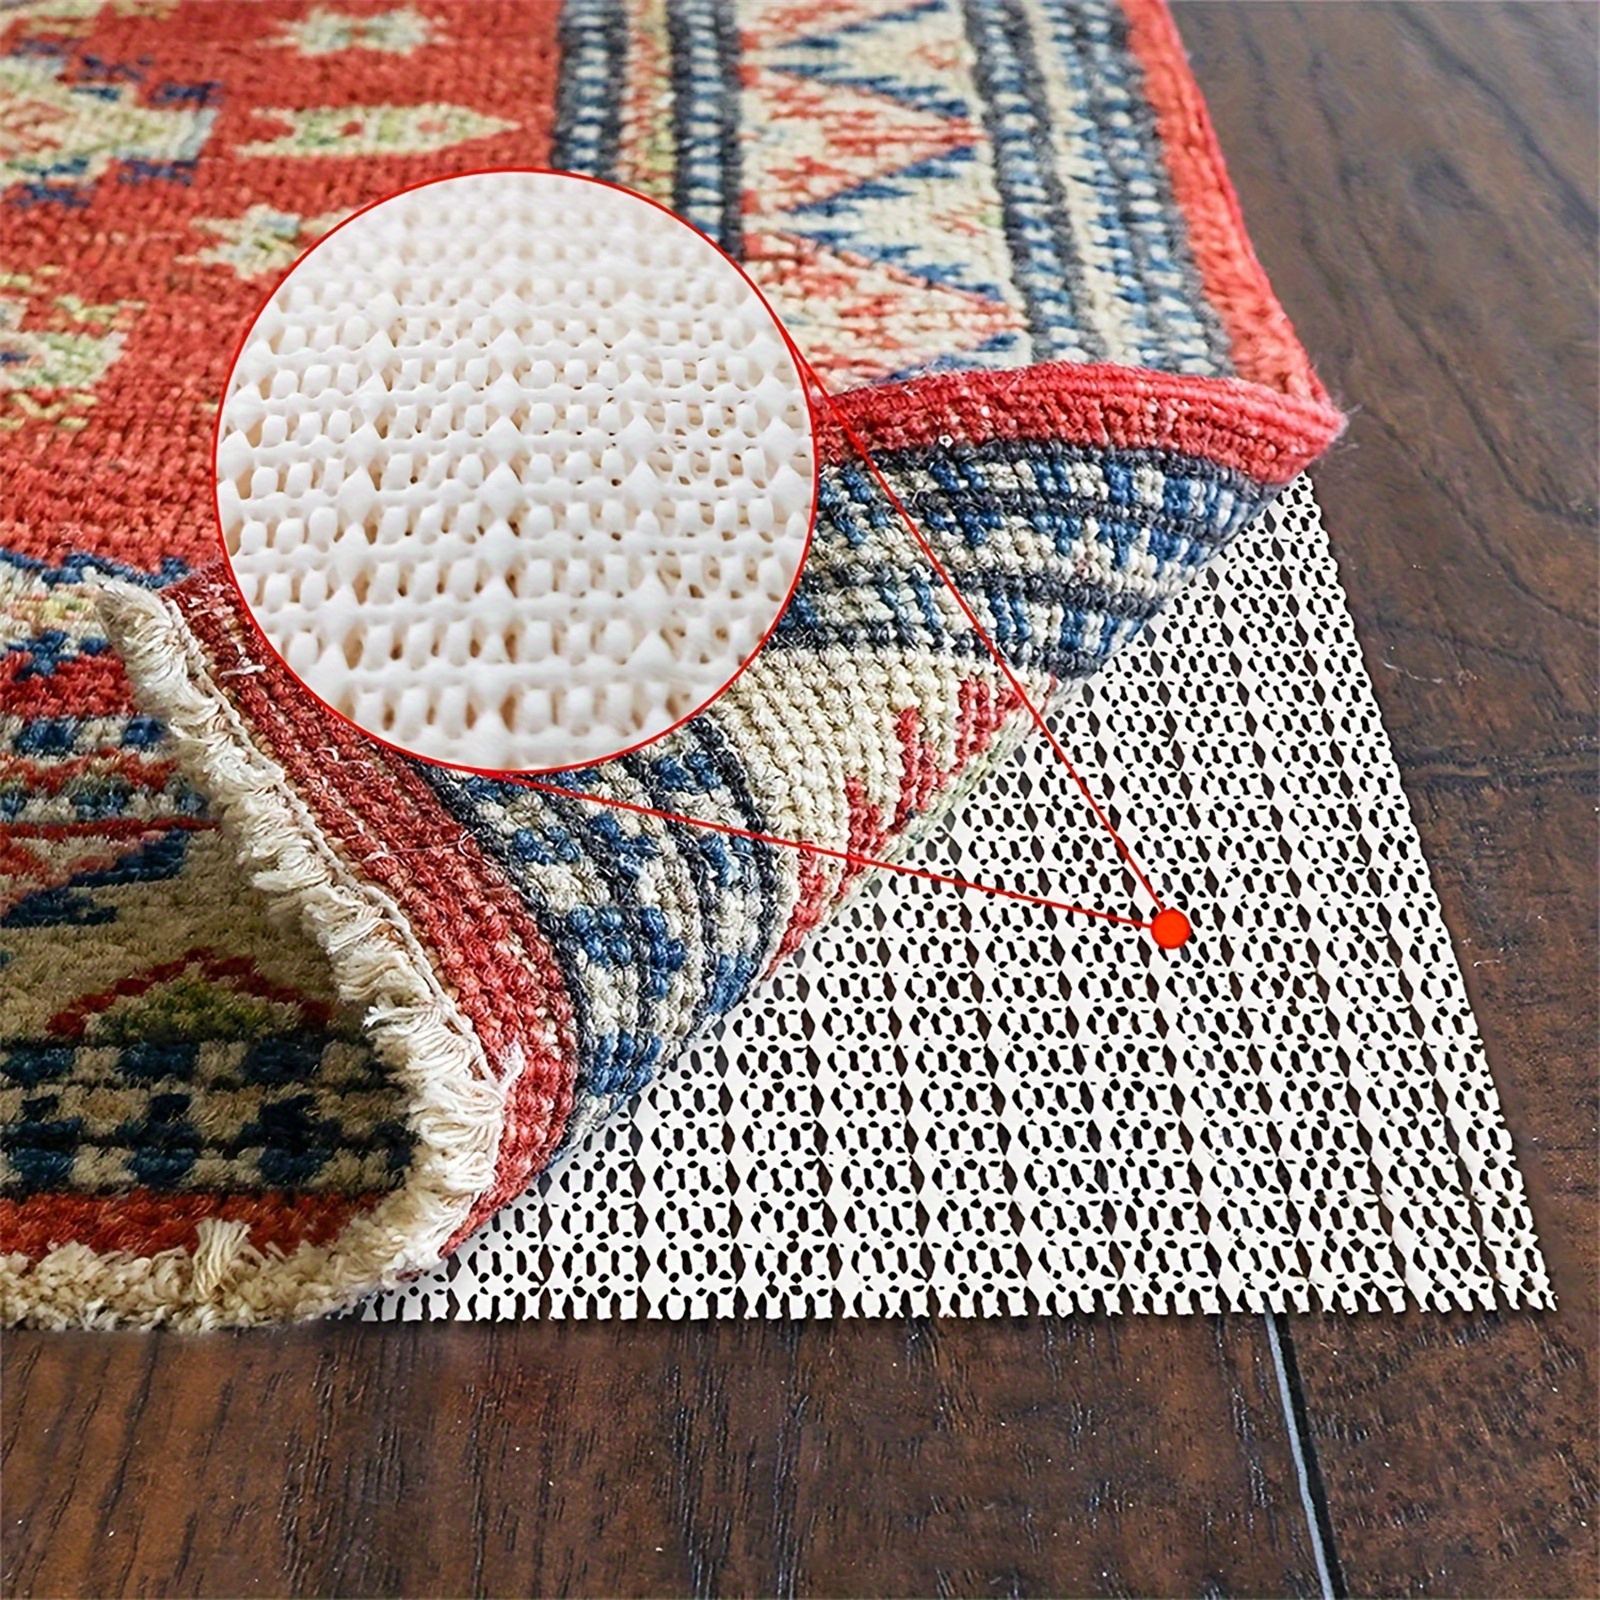 Rug Gripper Non Slip Rug Pad Underlay for Hardwood Floors Supper Grip Thick  Padding Adds Cushion Prevents Sliding Size 2 x 3